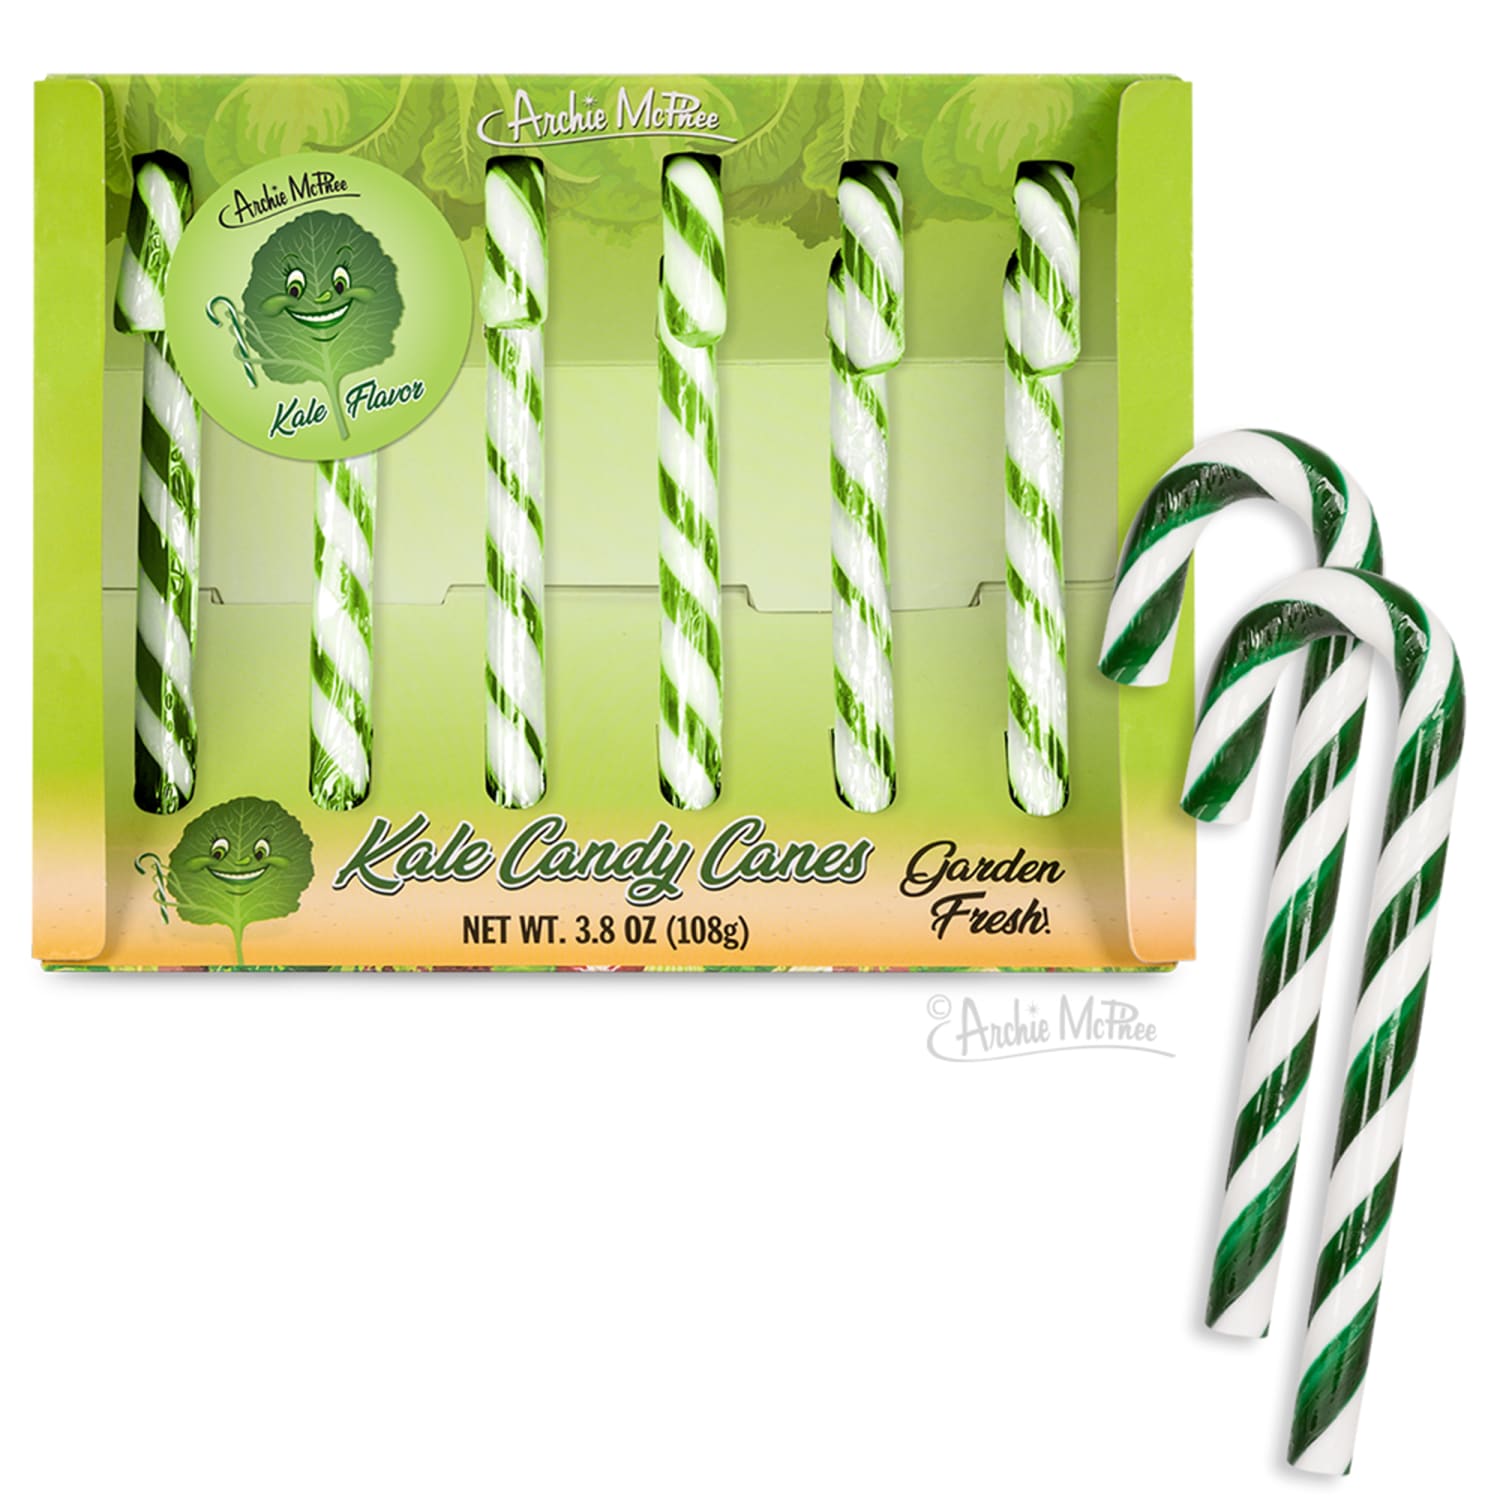 Food Babe - This is what's in the average candy cane